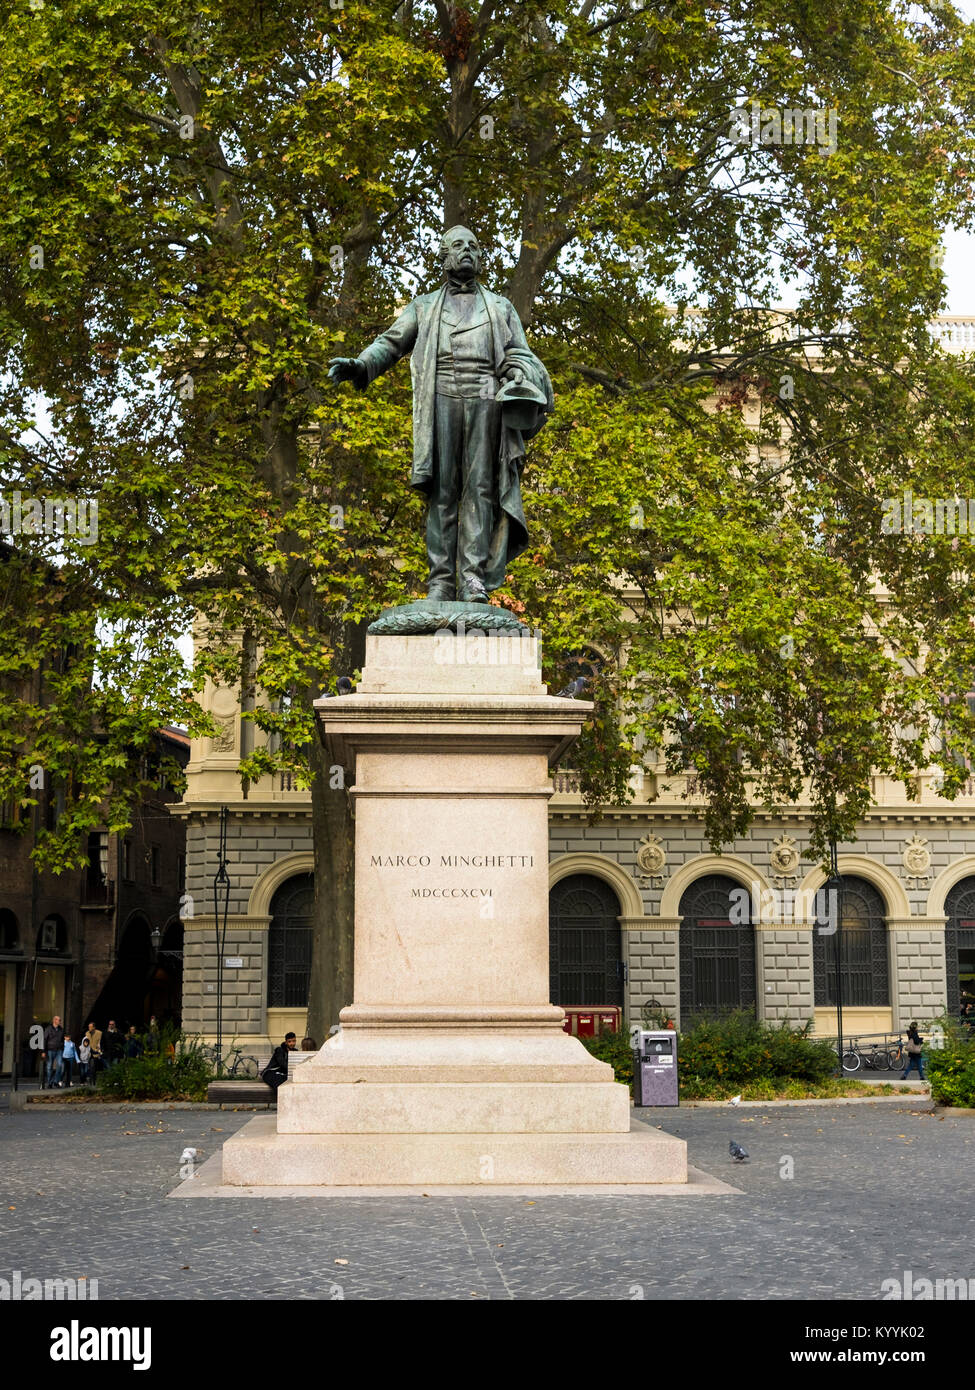 Statue of Marco Minghetti, Prime Minister of Italy 1873 - 1876, in Bologna, Italy Stock Photo